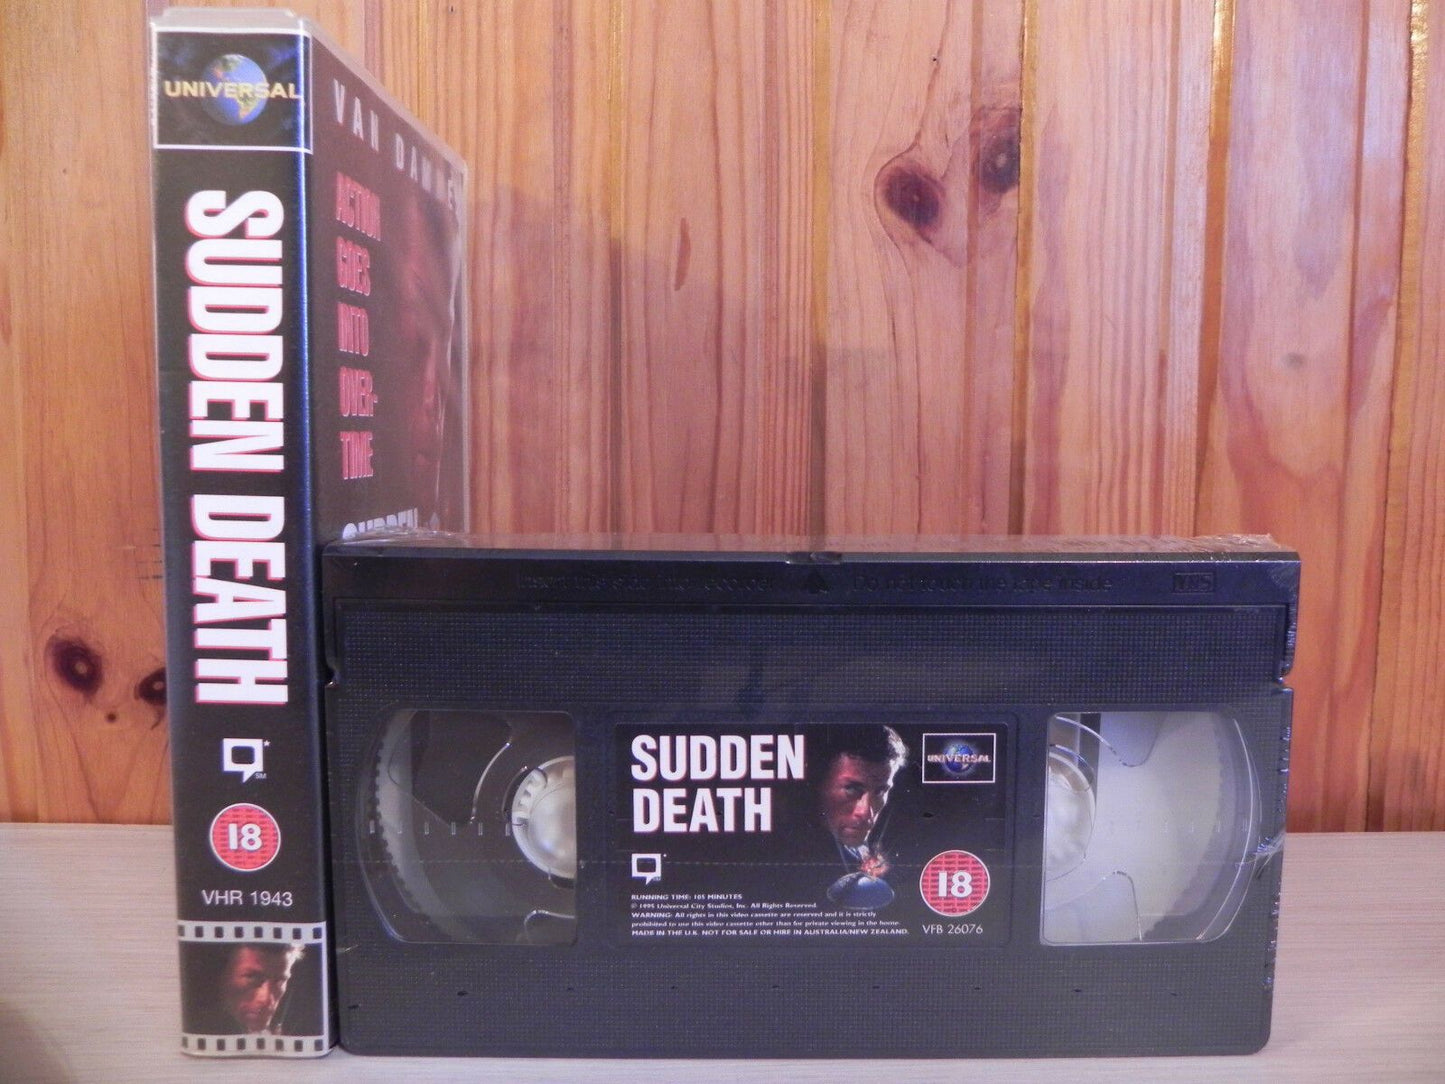 Sudden Death - Van Damme - Martial Arts - New And Sealed - Universal VHS - Video-